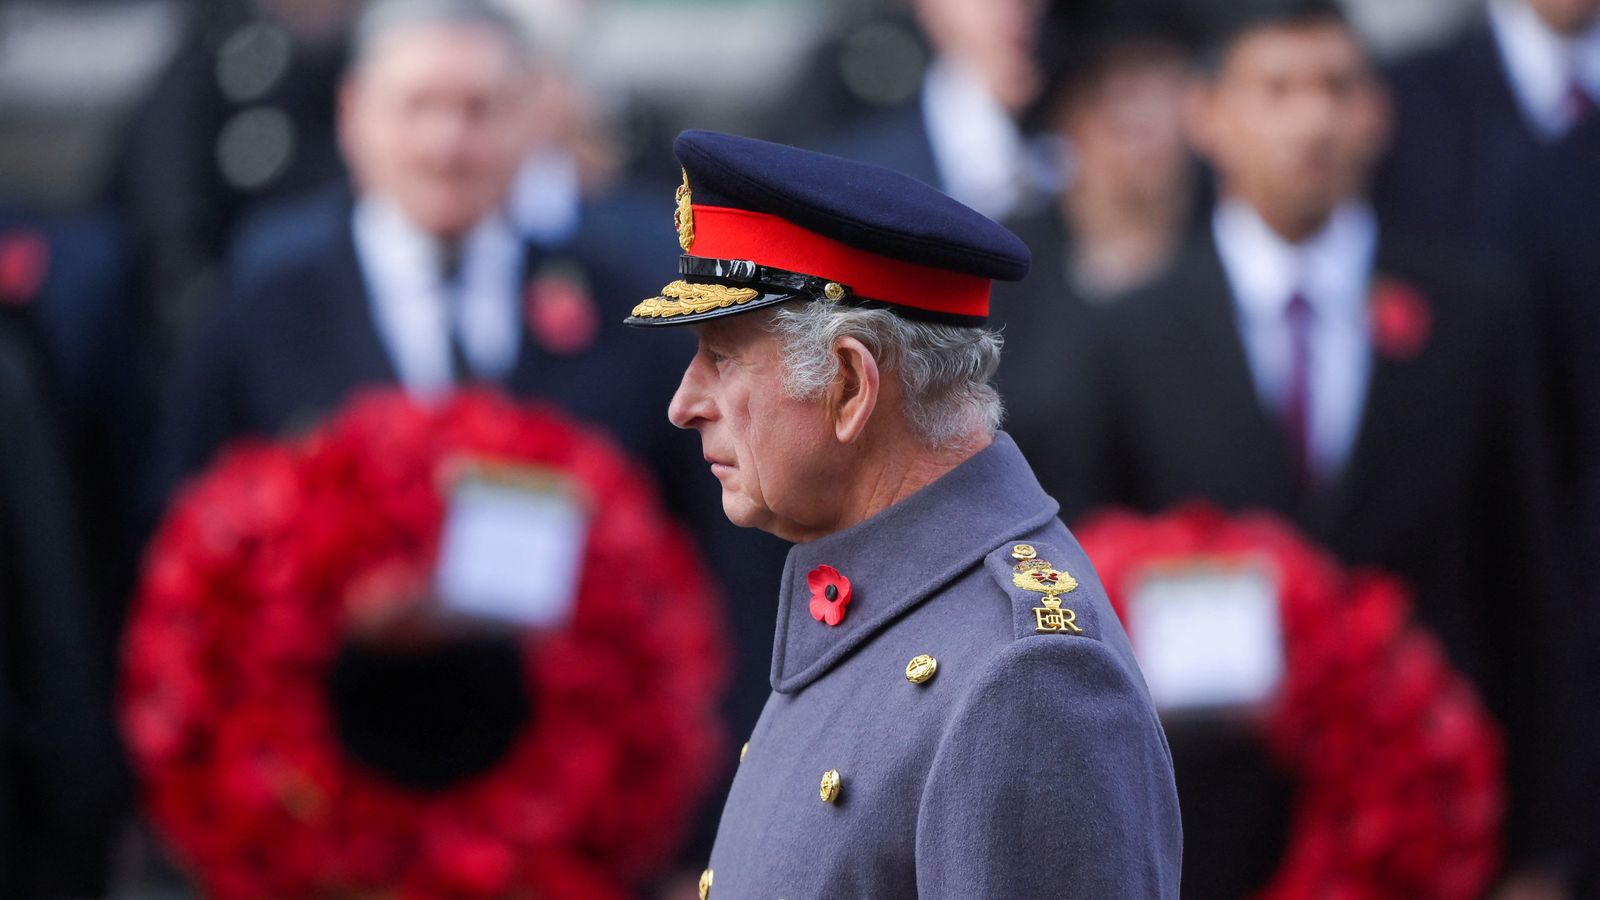 King leads first Remembrance Sunday service at Cenotaph as monarch following mother's death